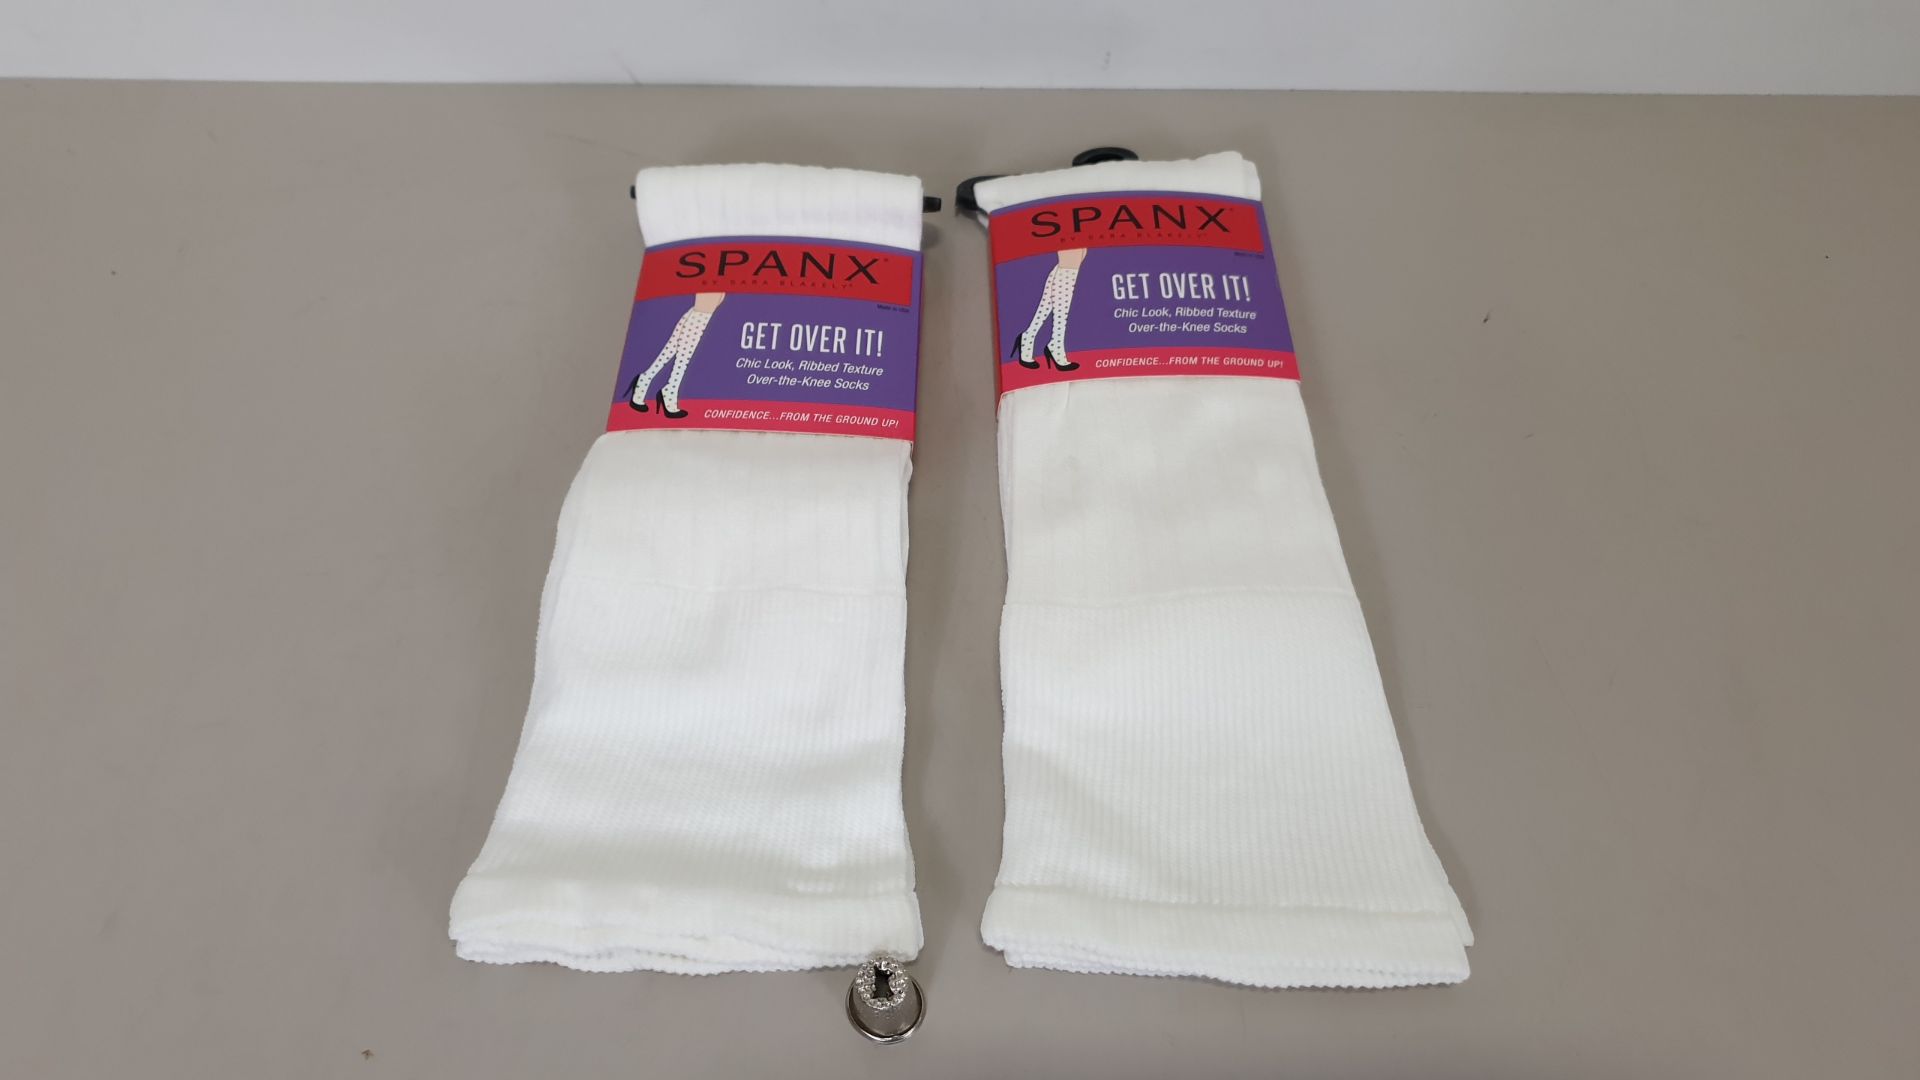 57 X BRAND NEW SPANX GET OVER IT! CHIC LOOK, RIBBED TEXTURE OVER-THE-KNEE SOCKS IN WHITE SIZE